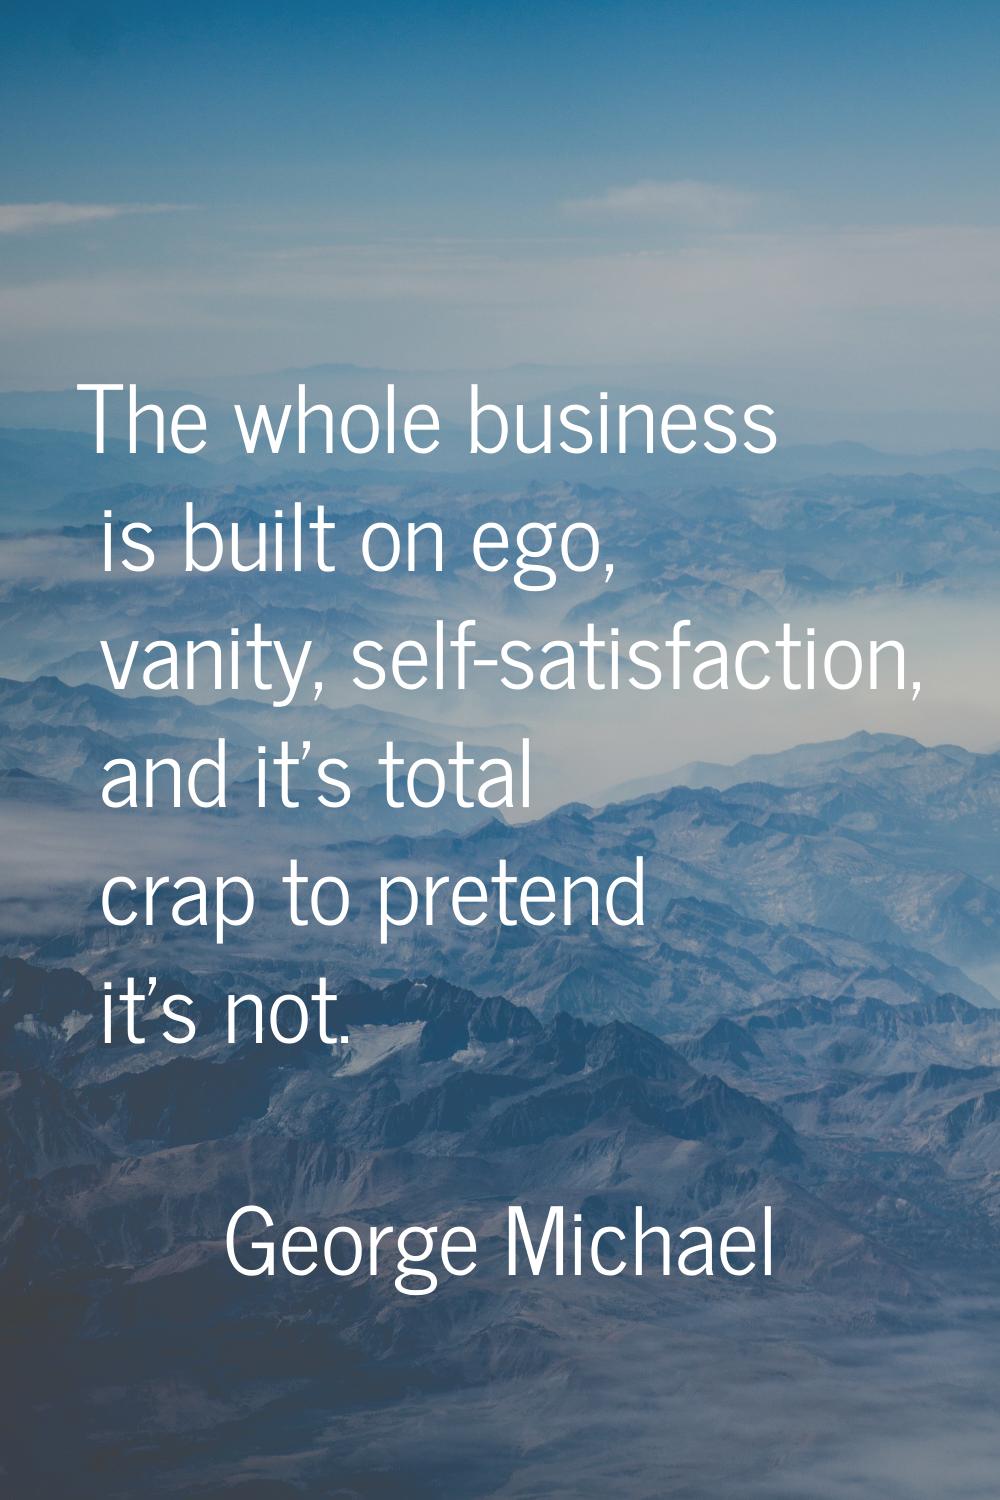 The whole business is built on ego, vanity, self-satisfaction, and it's total crap to pretend it's 